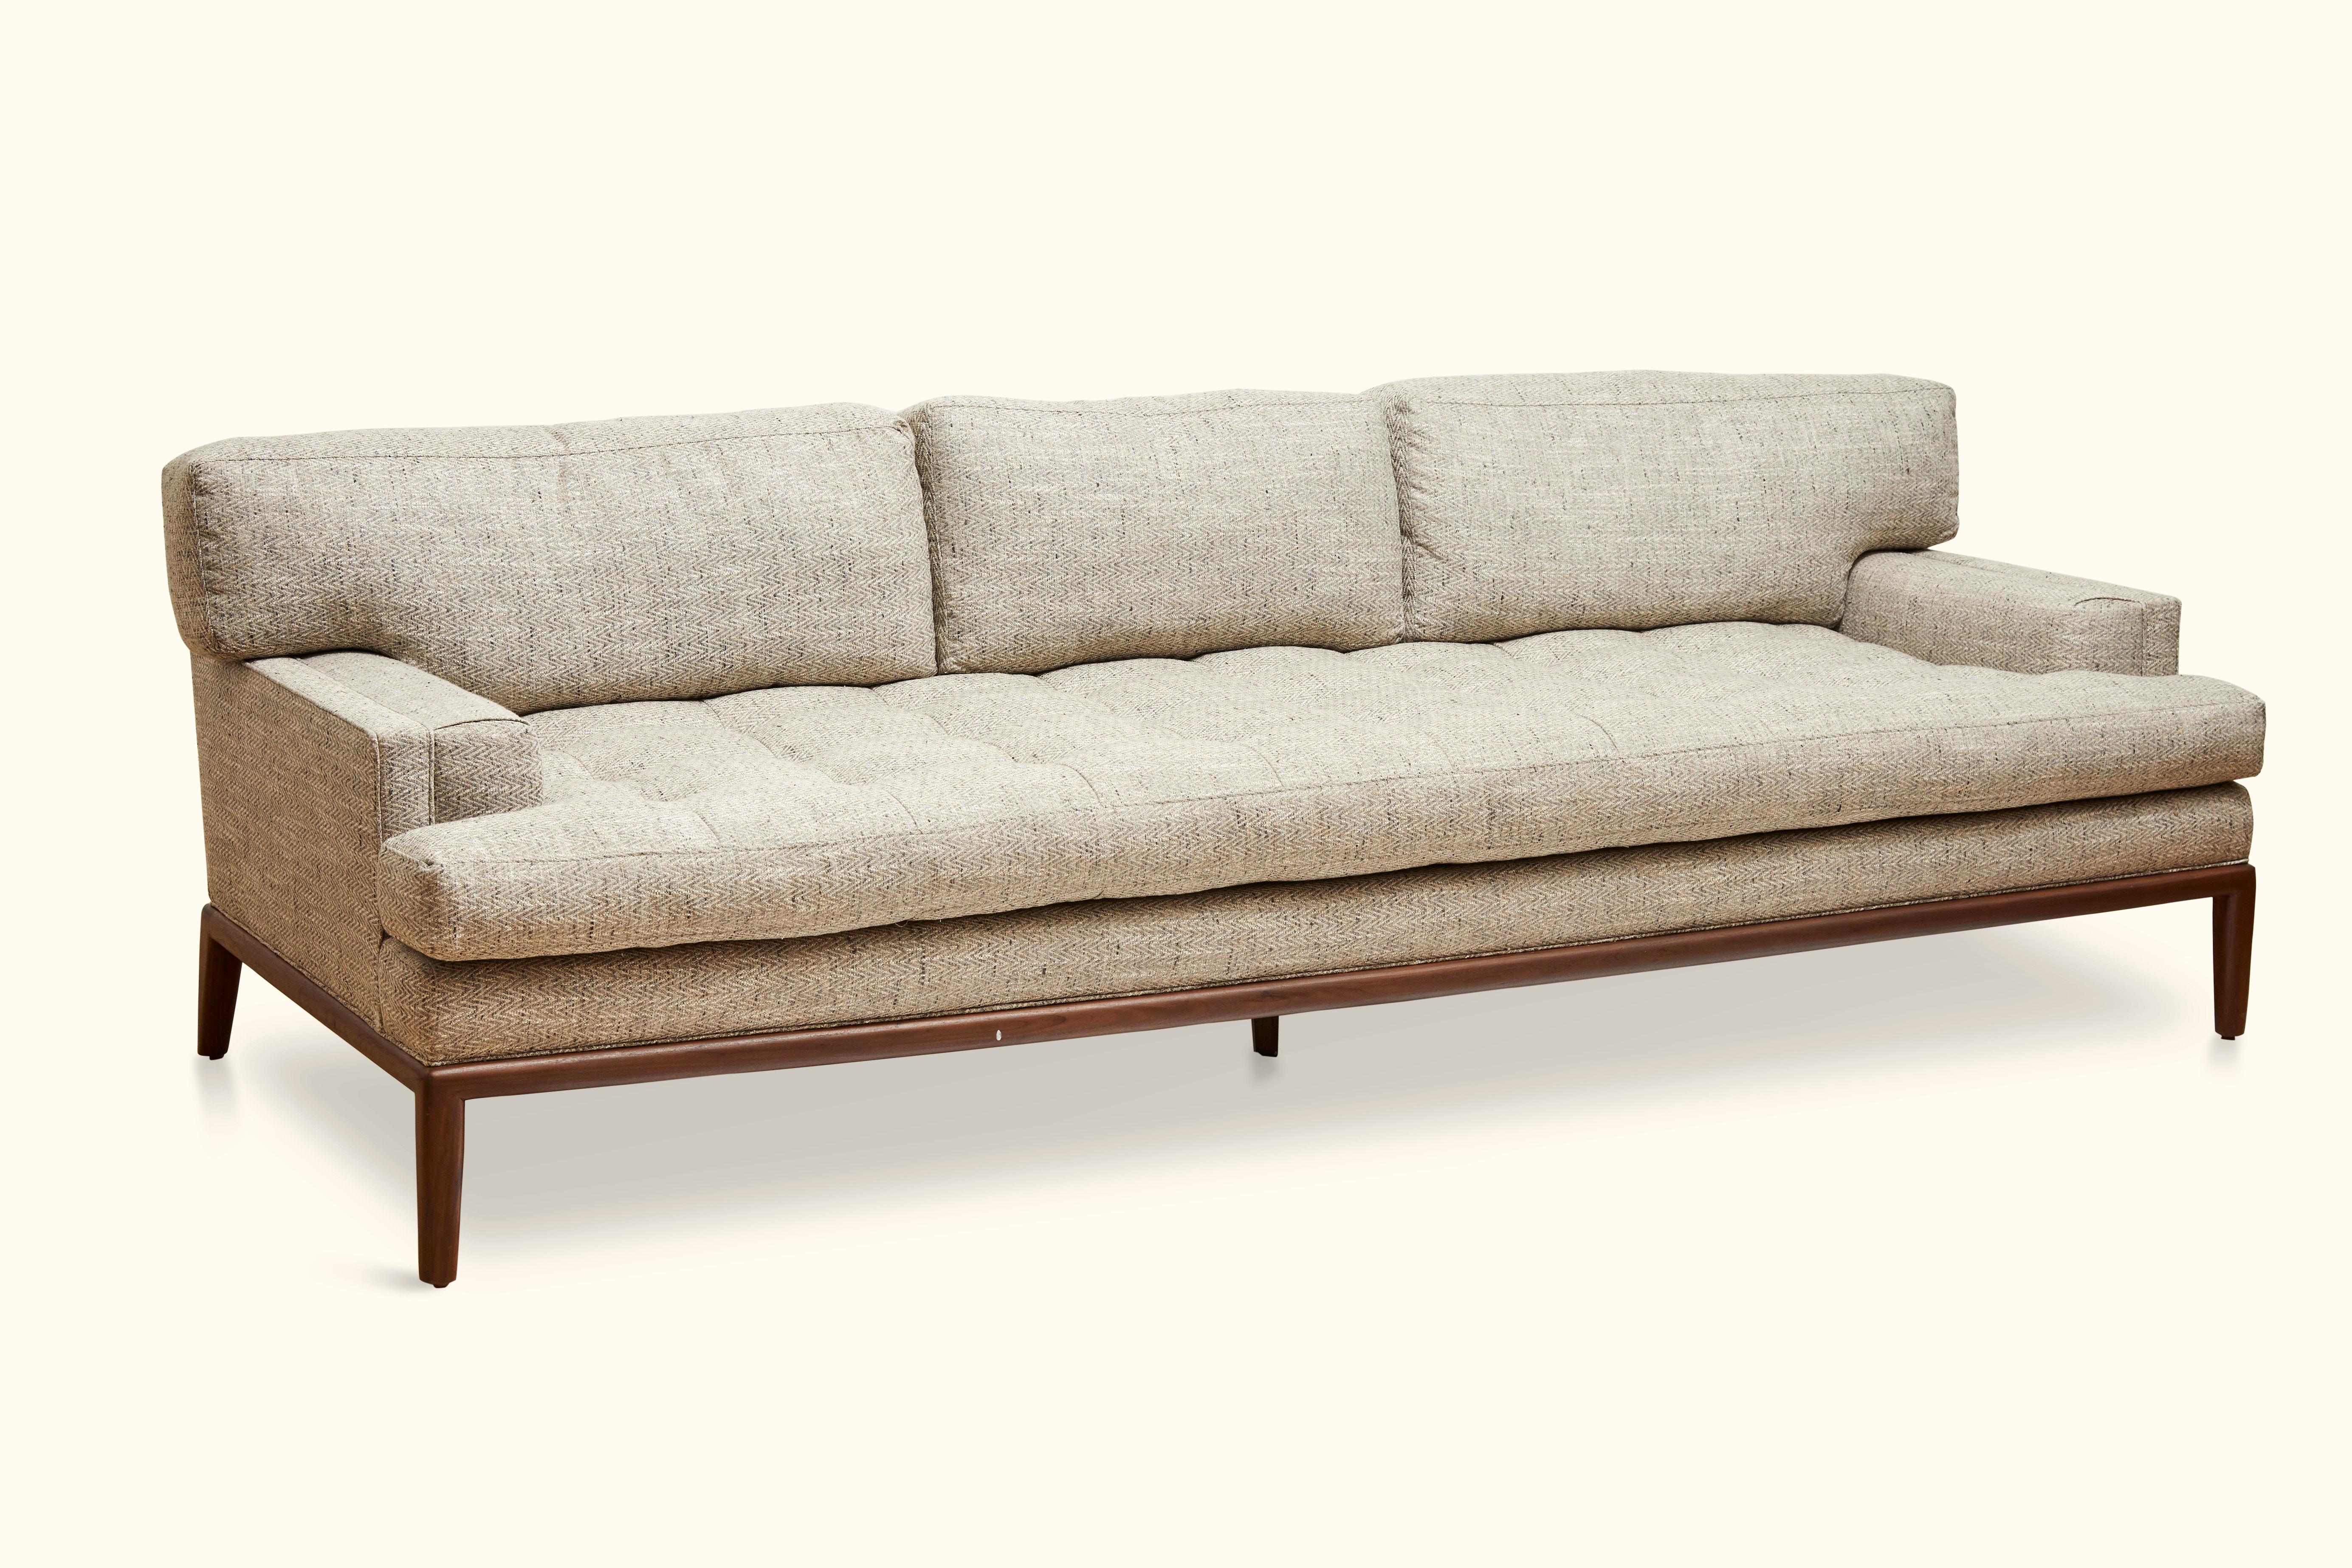 The Forster sofa is a midcentury-inspired sofa with a loose tufted seat, loose back cushions, and piped details. The sofa rests atop a simple, rounded wood base. Shown here in herringbone upholstery and a Natural Walnut Base. 

The Lawson-Fenning